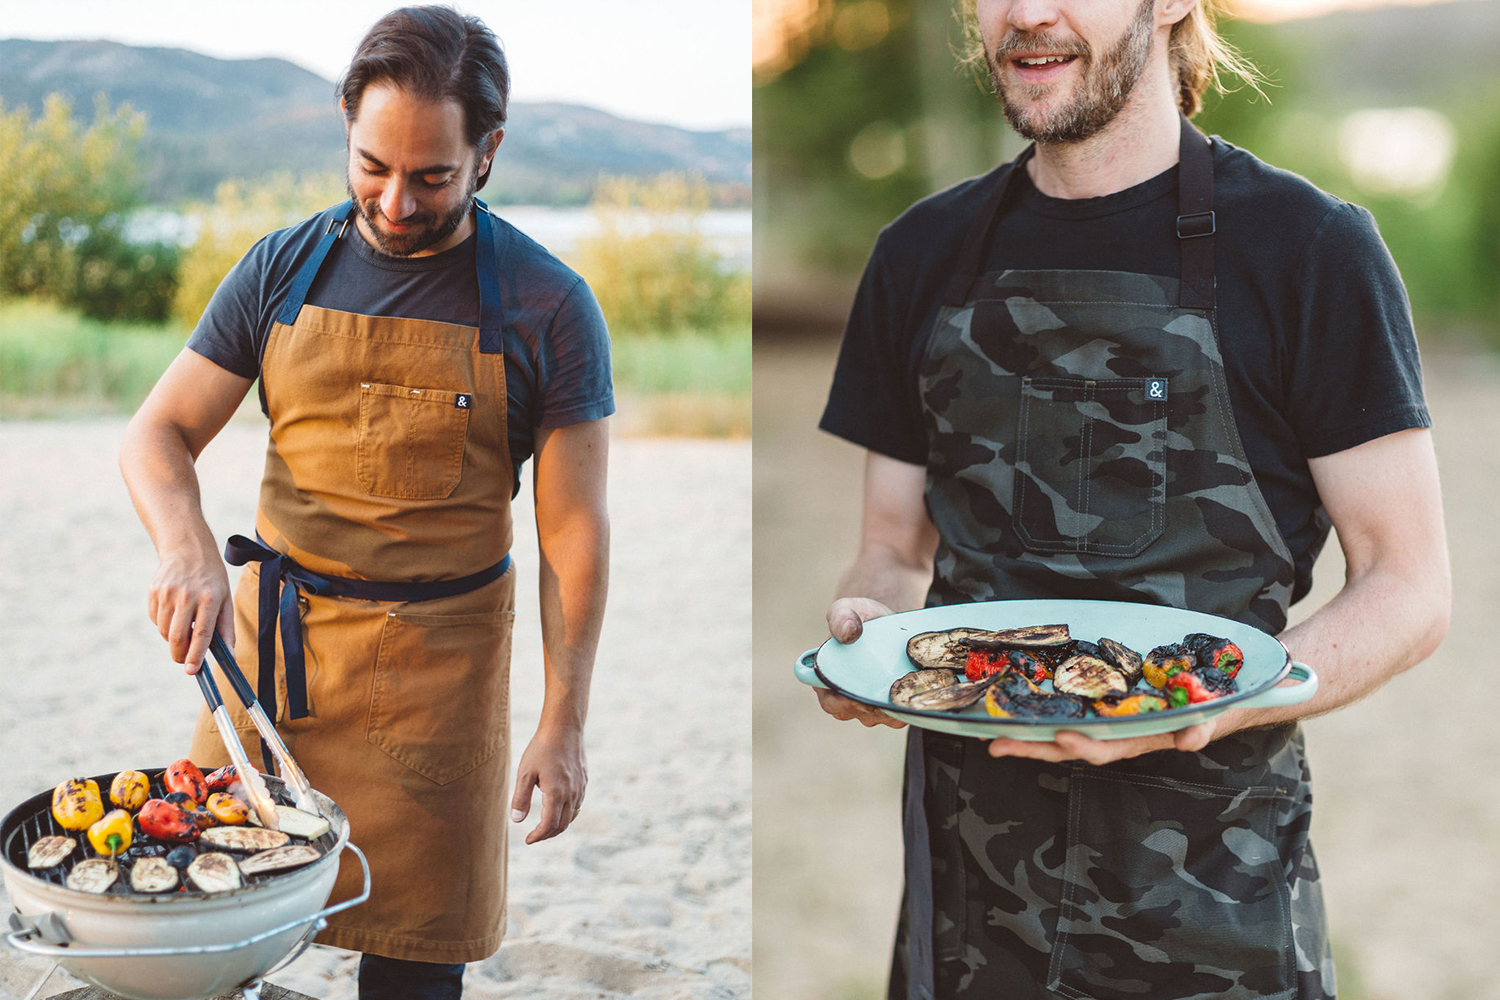 A man grilling and wearing the Denver apron from Hedley & Bennett on the left, on the right a man carrying a plate of grilled food wearing a camouflage apron.